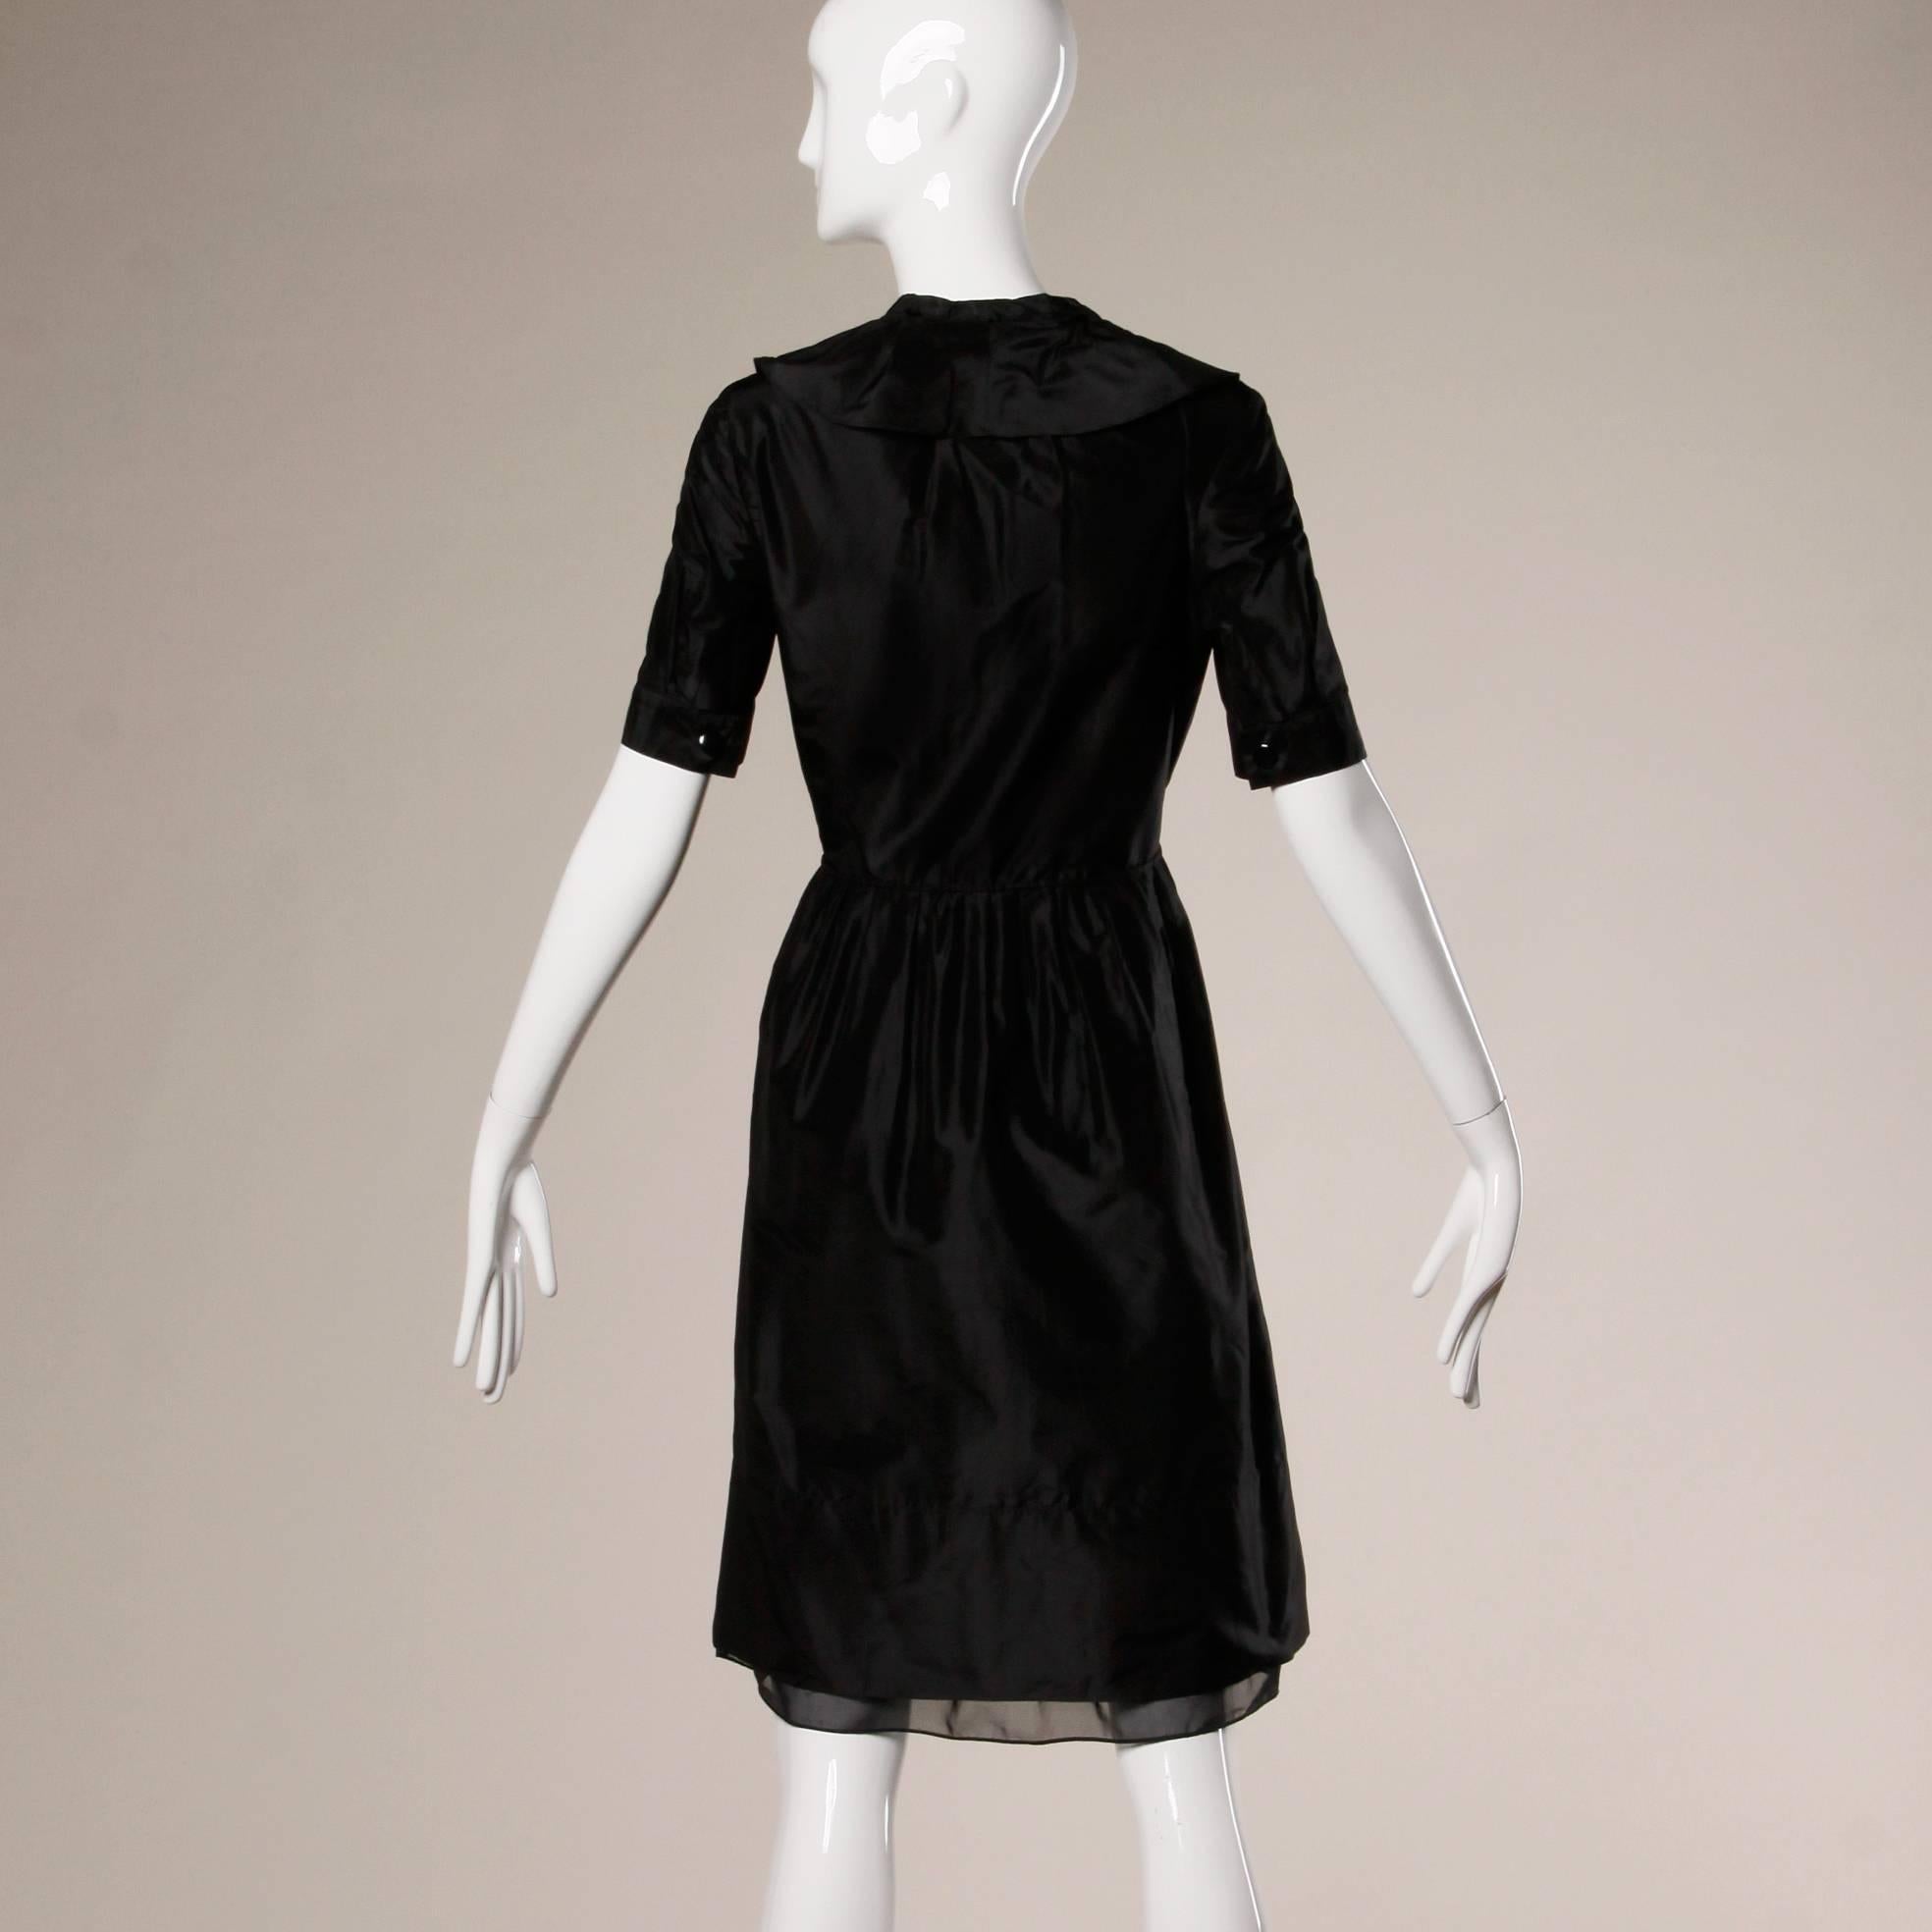 Chloe Black Silk Taffeta Dress wth Ruffled Collar In Excellent Condition For Sale In Sparks, NV